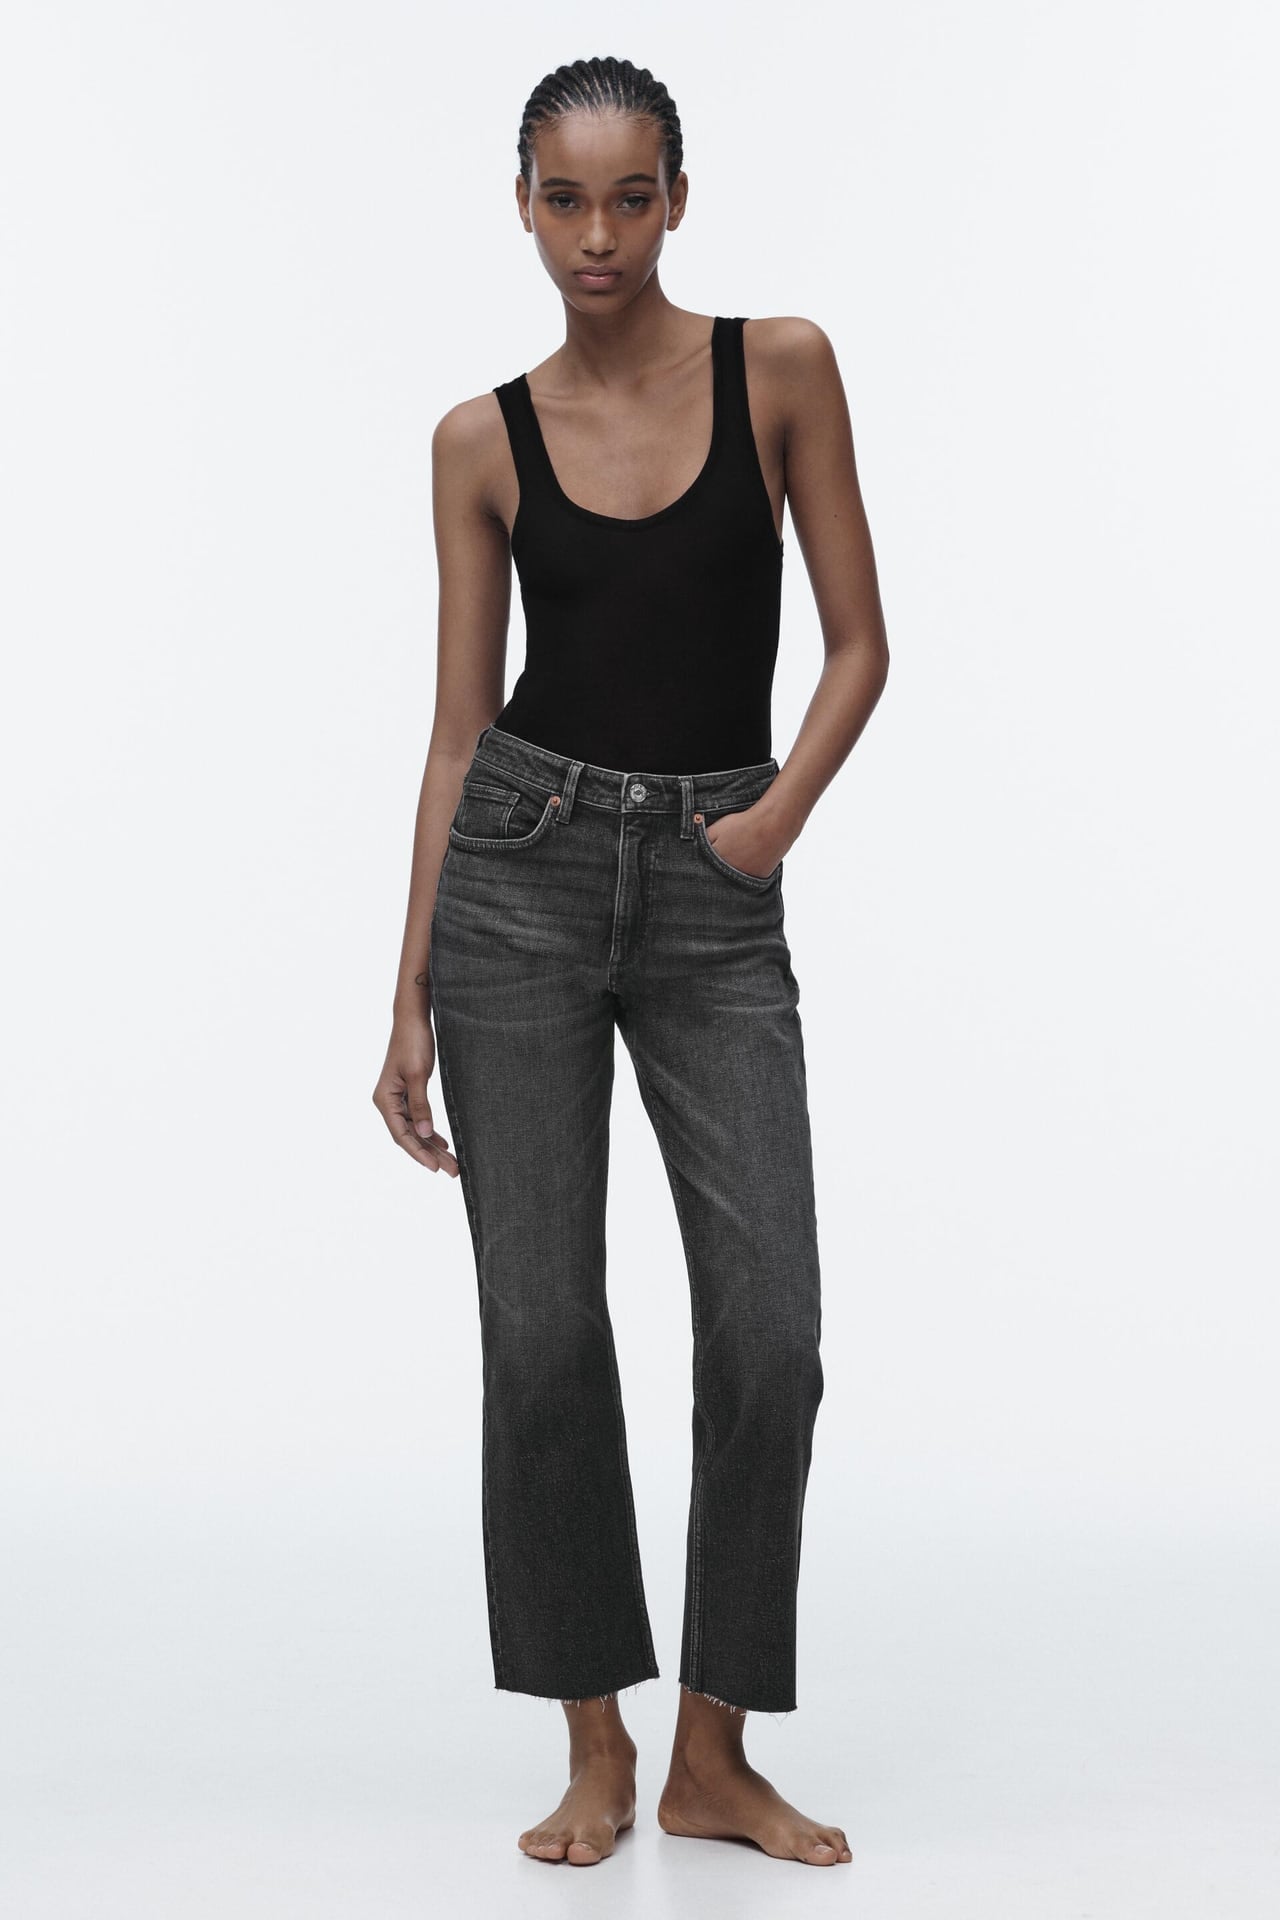 TRF MID-RISE FLARE CROPPED JEANS - Black